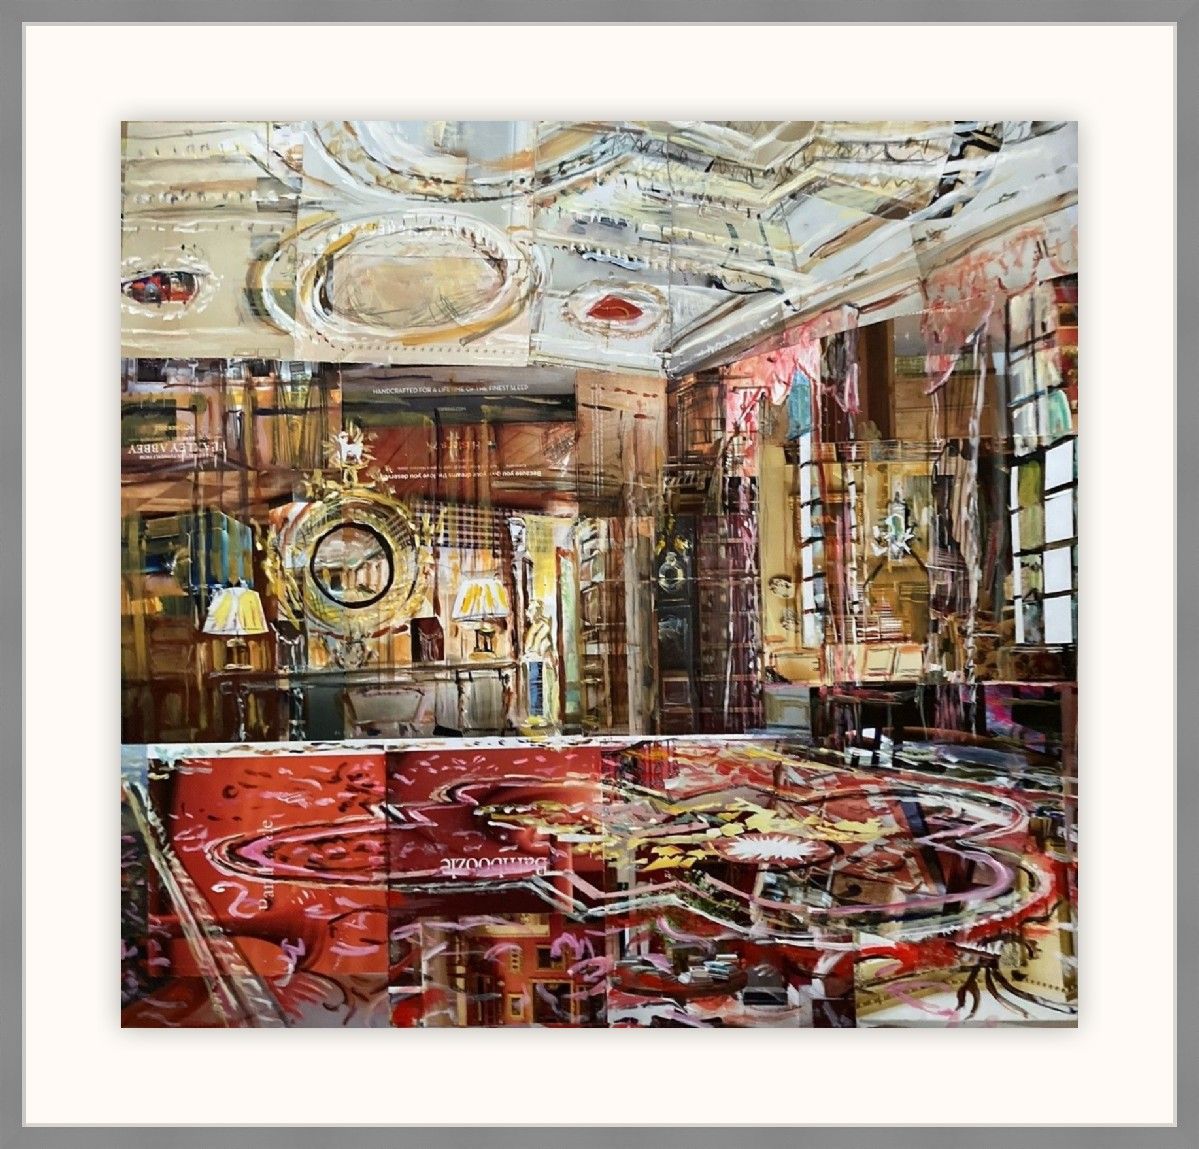 Merchant Taylor's Hall, Parlour (bamboozle) by Alison Pullen